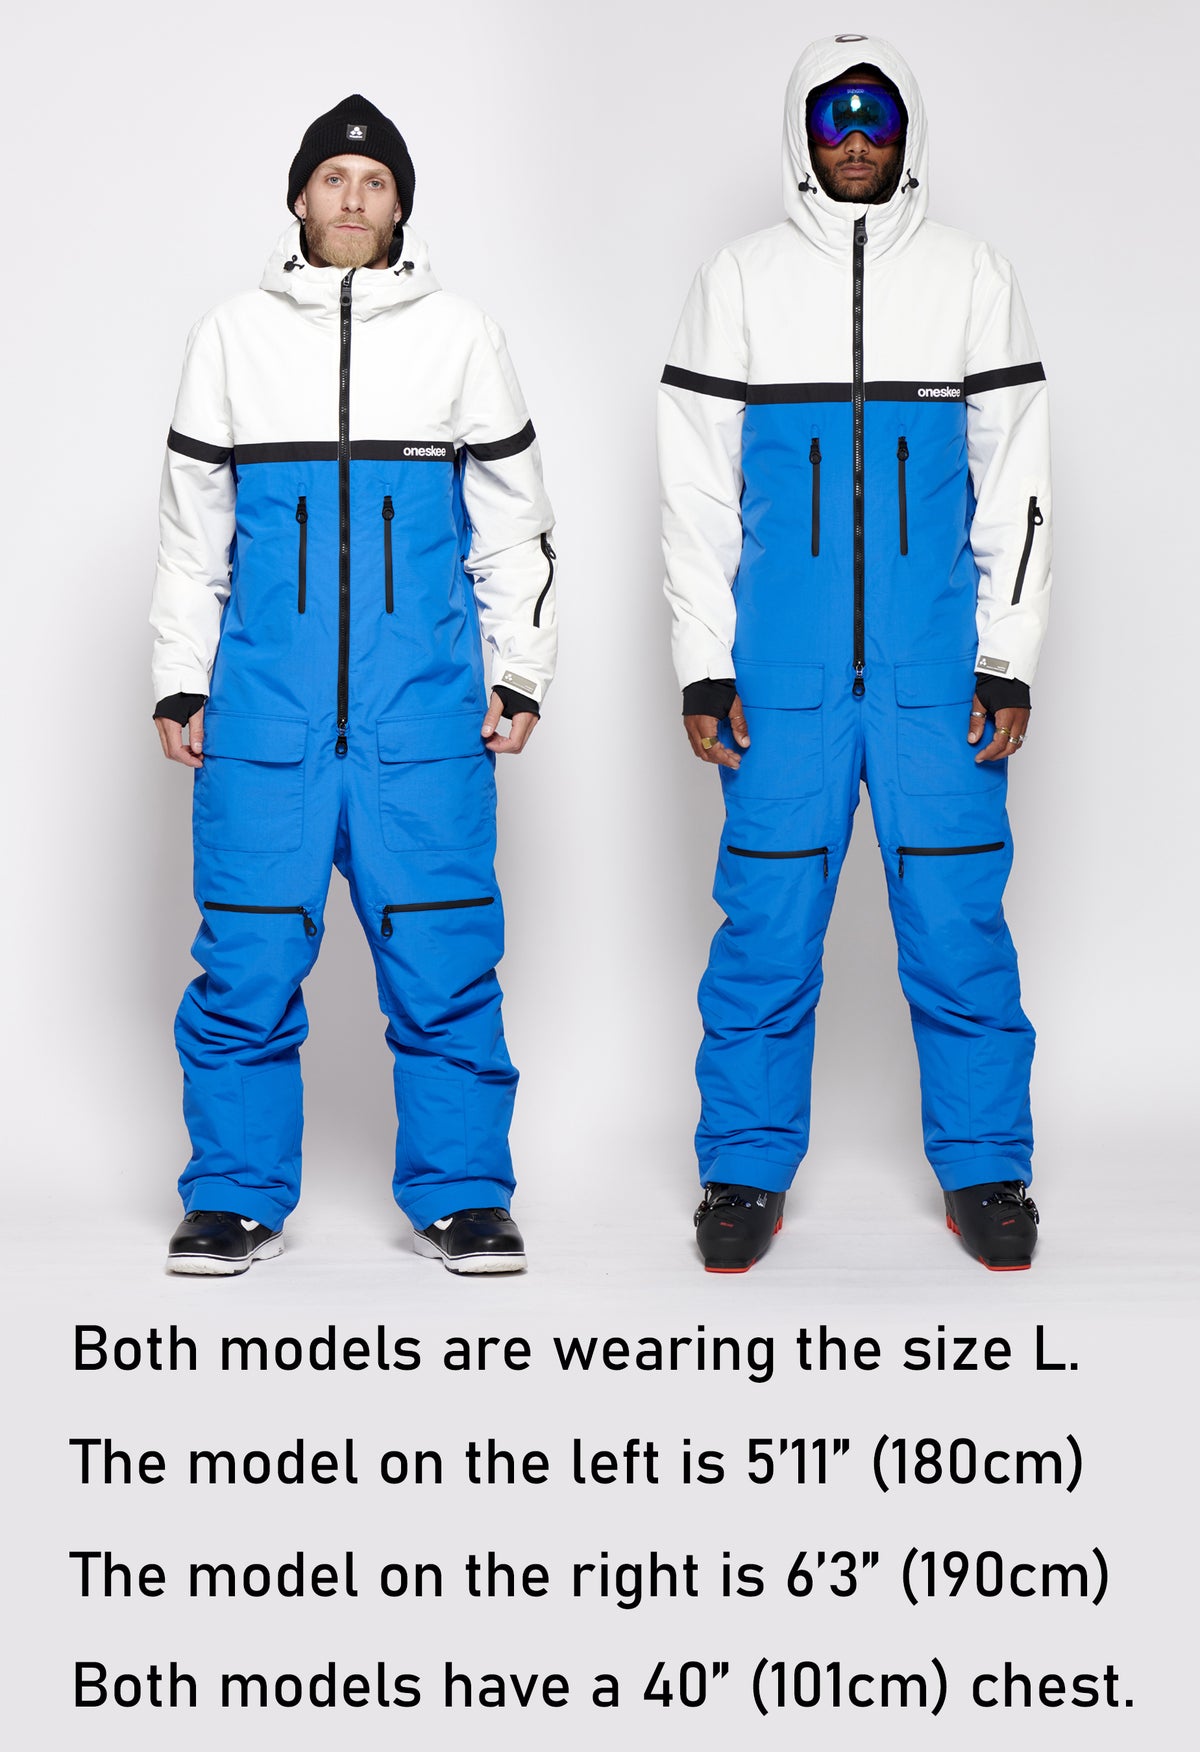 Both models are wearing the size L. The model on the left is 5'11" (180cm) The model on the right is 6'3" (190cm) Both models have a 40" (101cm) chest.